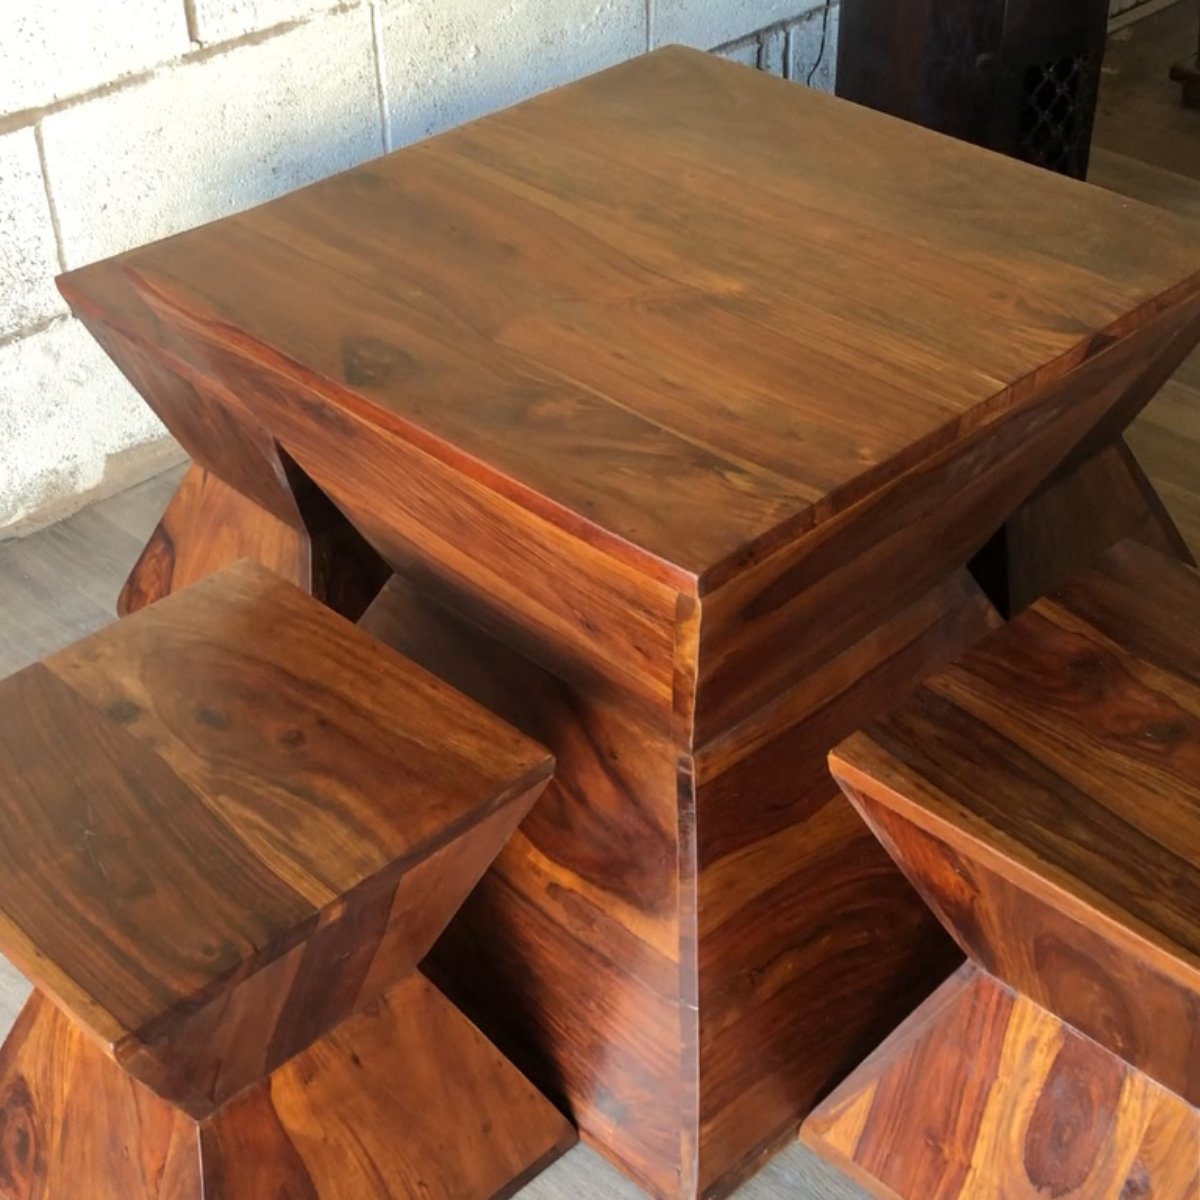 Wooden Pyramid Stools and Coffee Table Set - Stylla London